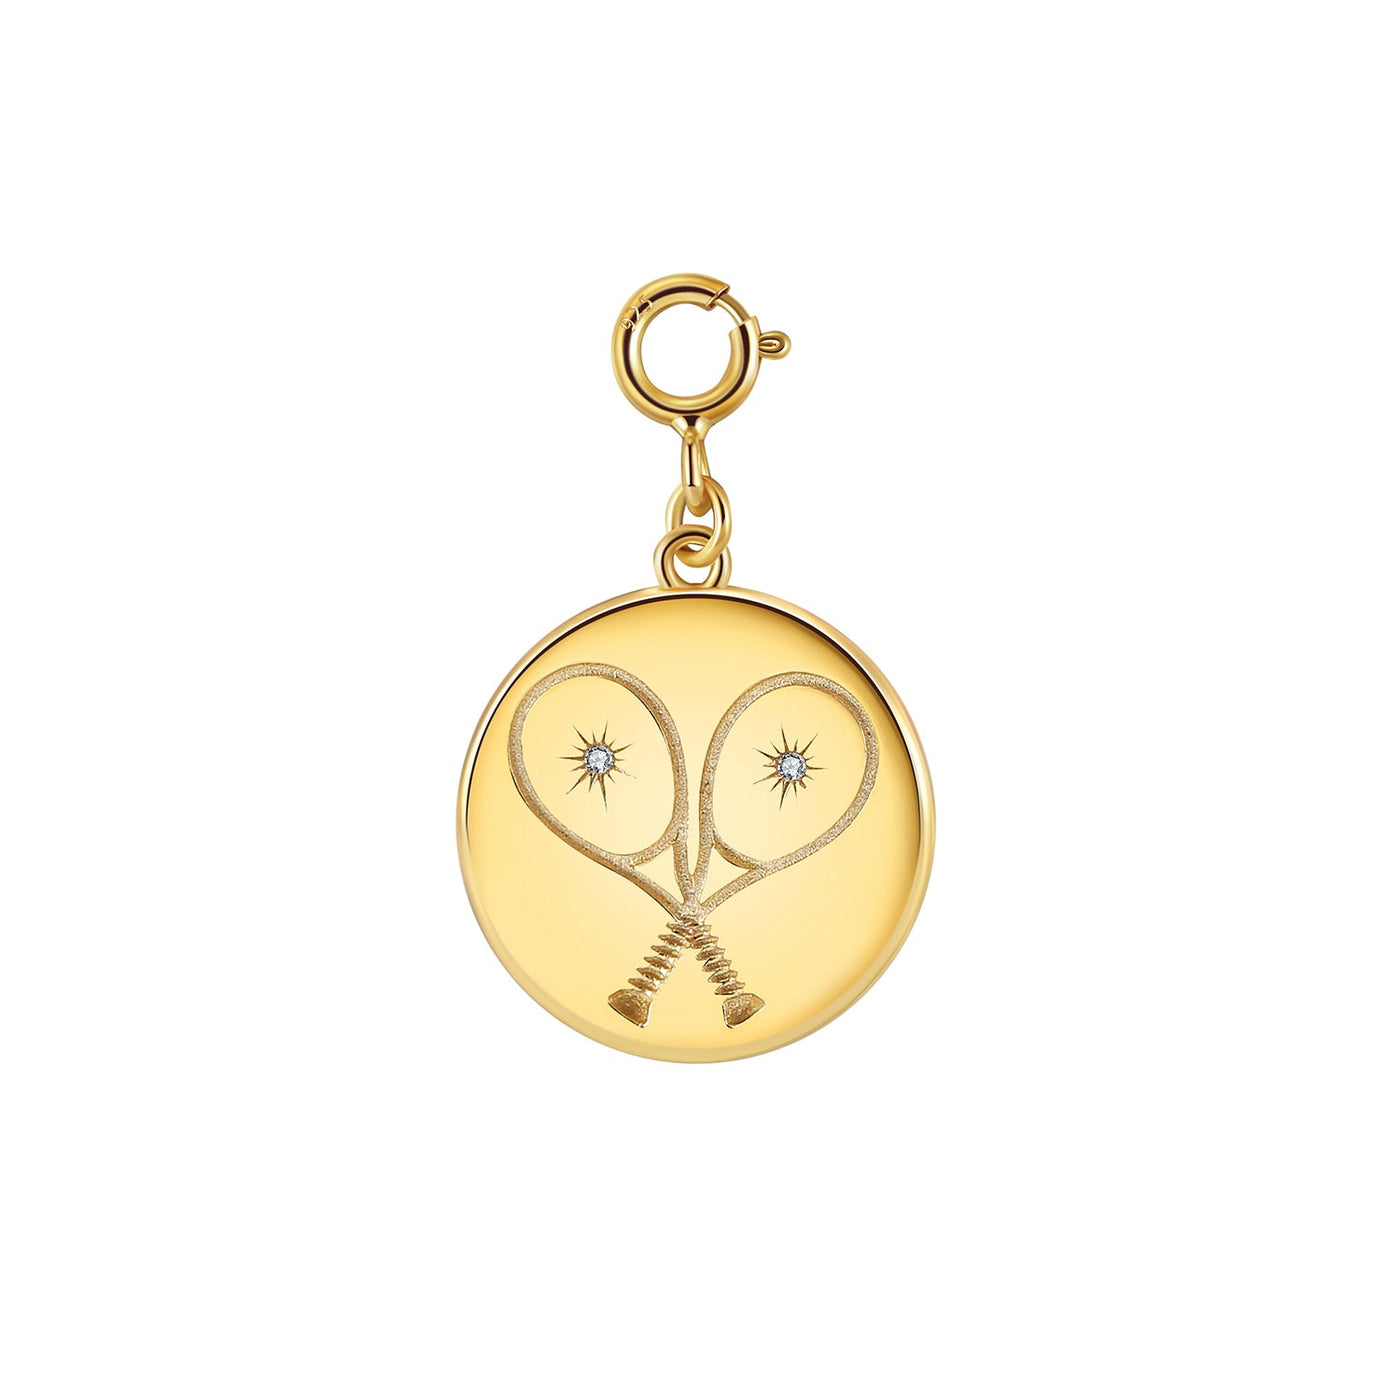 Chic Gold Tennis Heart Disc Pendant Charm featuring  double sided pendant charm with 2 racquets creating a 'heart' with impact crystal inside each and our LoveMatch insignia on the reverse with a sparkling crystal center. 